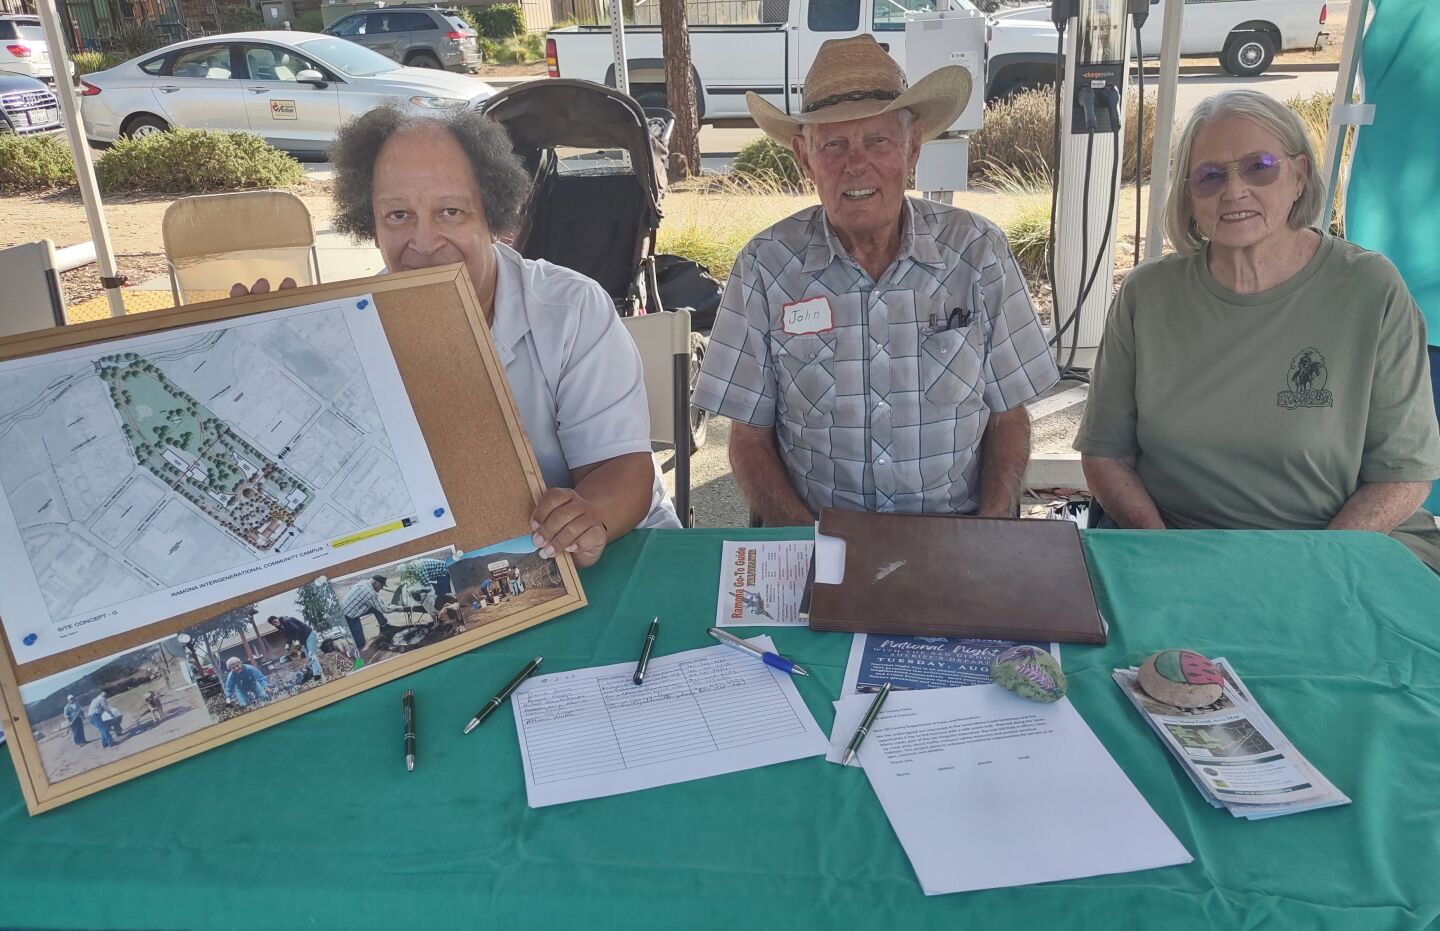 Santa Maria Greenway supporters, from left, David Stone, John Degenfelder and Barbara Hughes display a map of a potential Greenway site near the planned Ramona Intergenerational Community Campus (RICC).